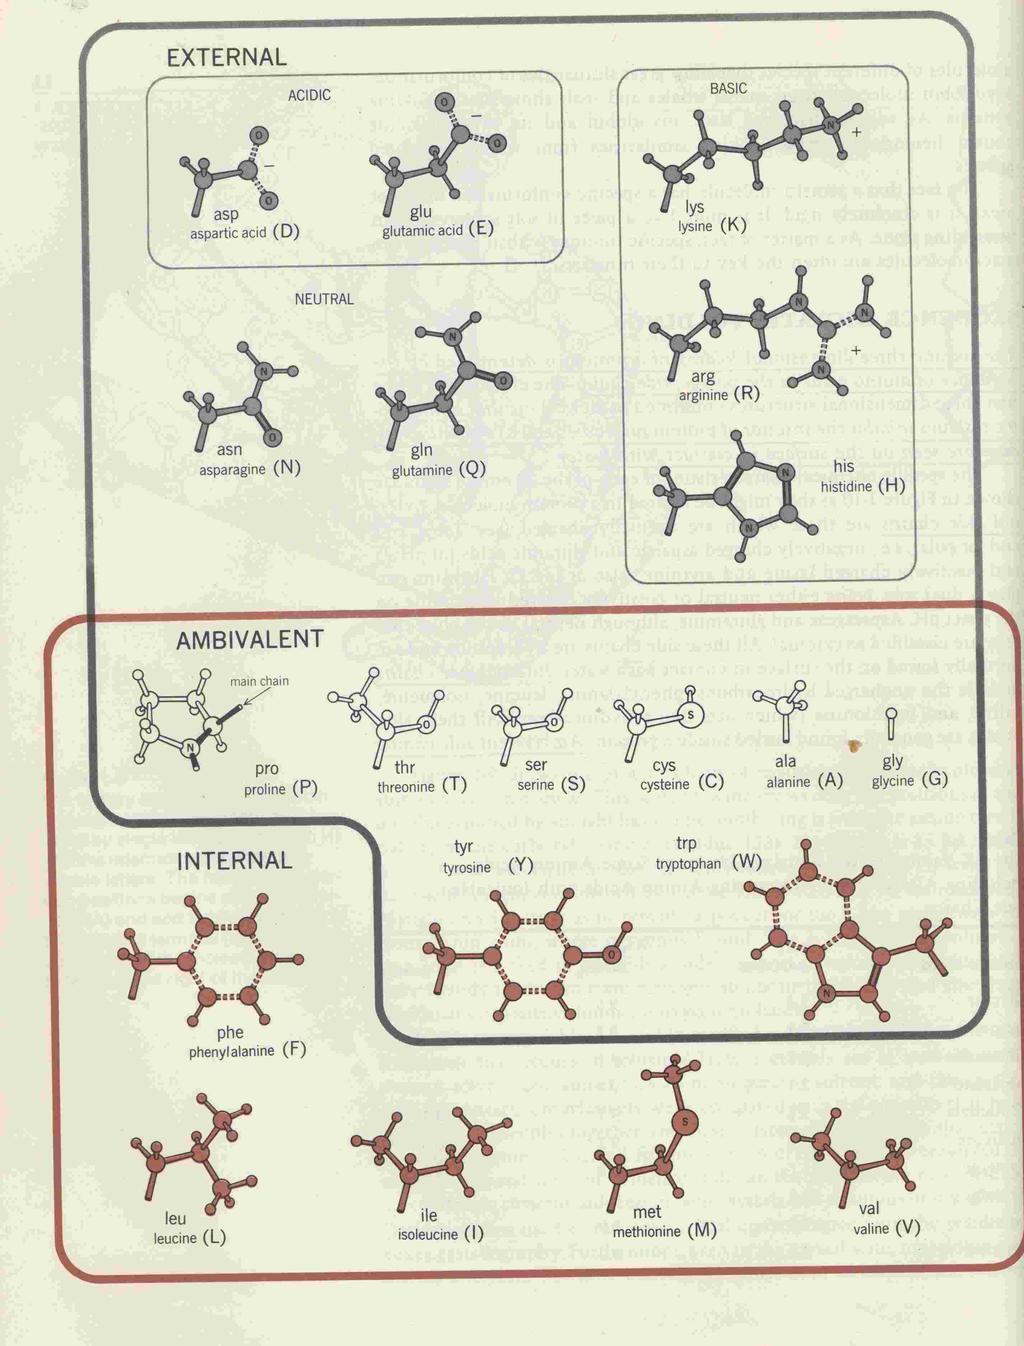 The Different Groups of Amino-Acids Charged